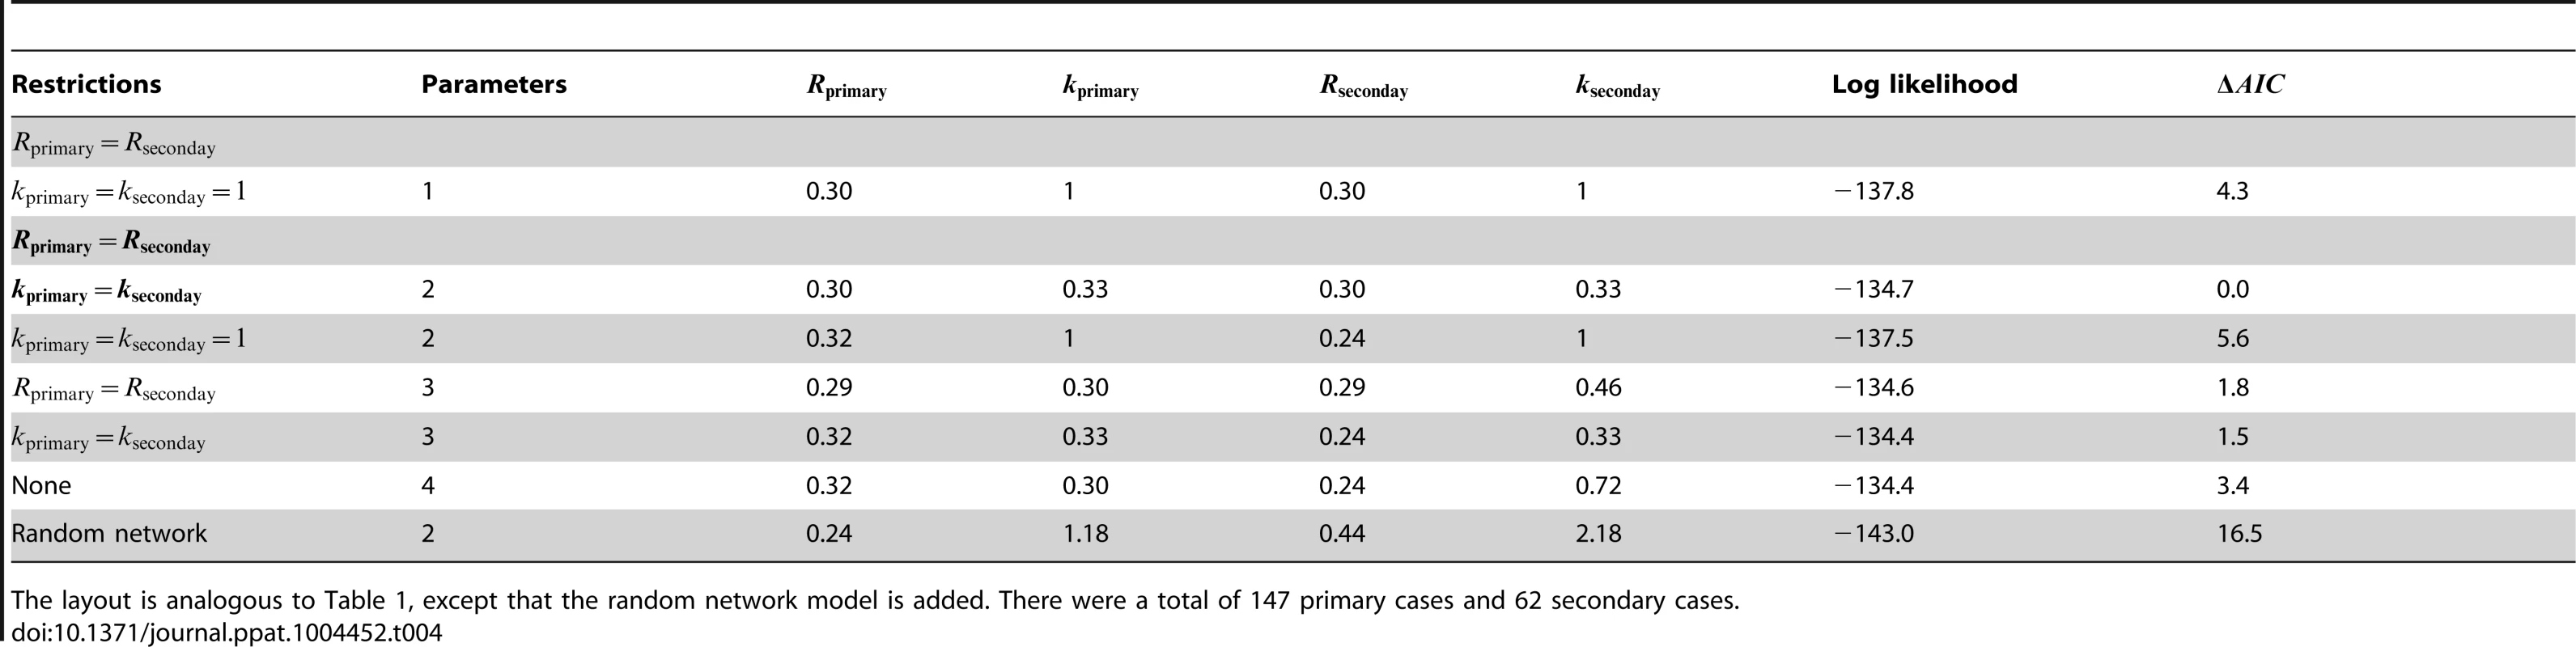 Inference results for comparing the transmissibility of primary and secondary cases for human monkeypox in the Democratic Republic of Congo, 1981–1984.